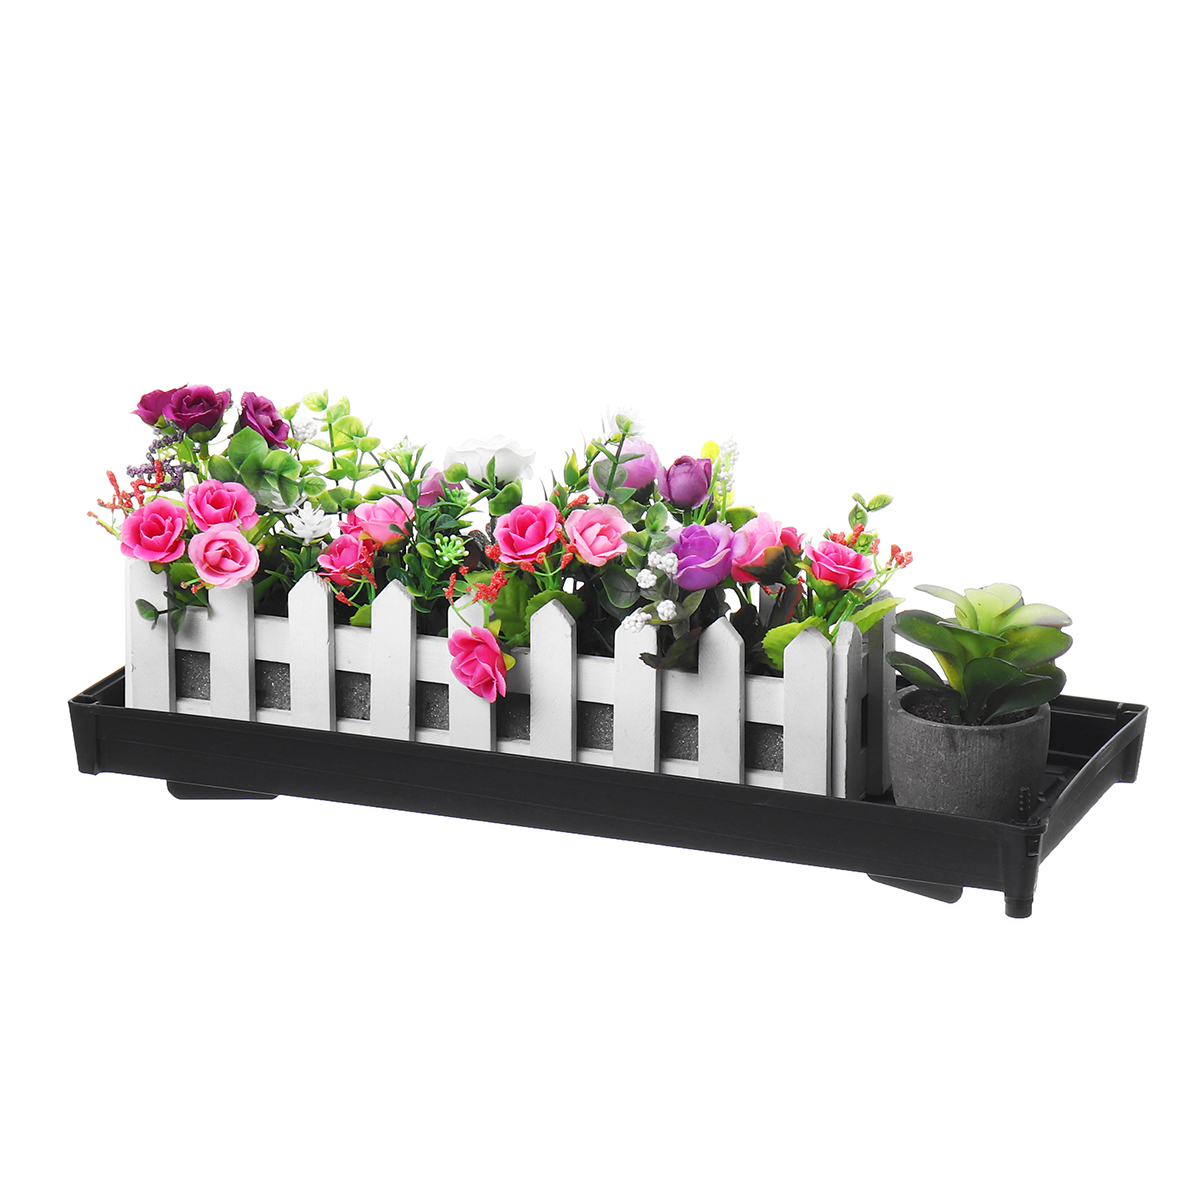 PP-Plant-Tray-Succulents-Seedling-Drain-Balcony-Growing-Holder-Nursery-Garden-Decorations-1581228-7